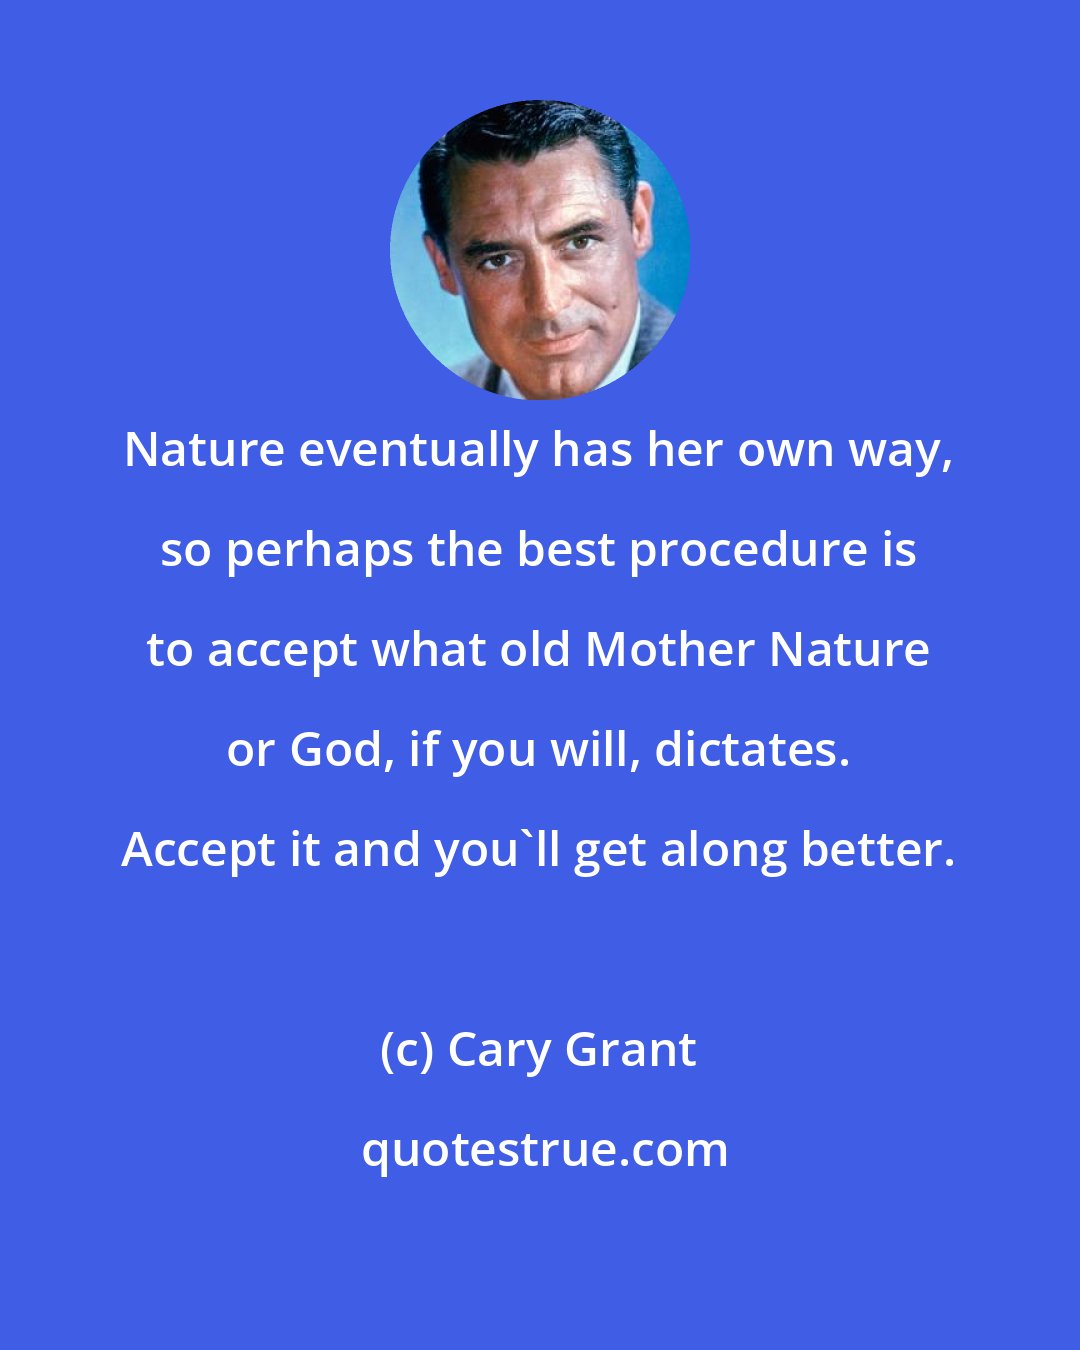 Cary Grant: Nature eventually has her own way, so perhaps the best procedure is to accept what old Mother Nature or God, if you will, dictates. Accept it and you'll get along better.